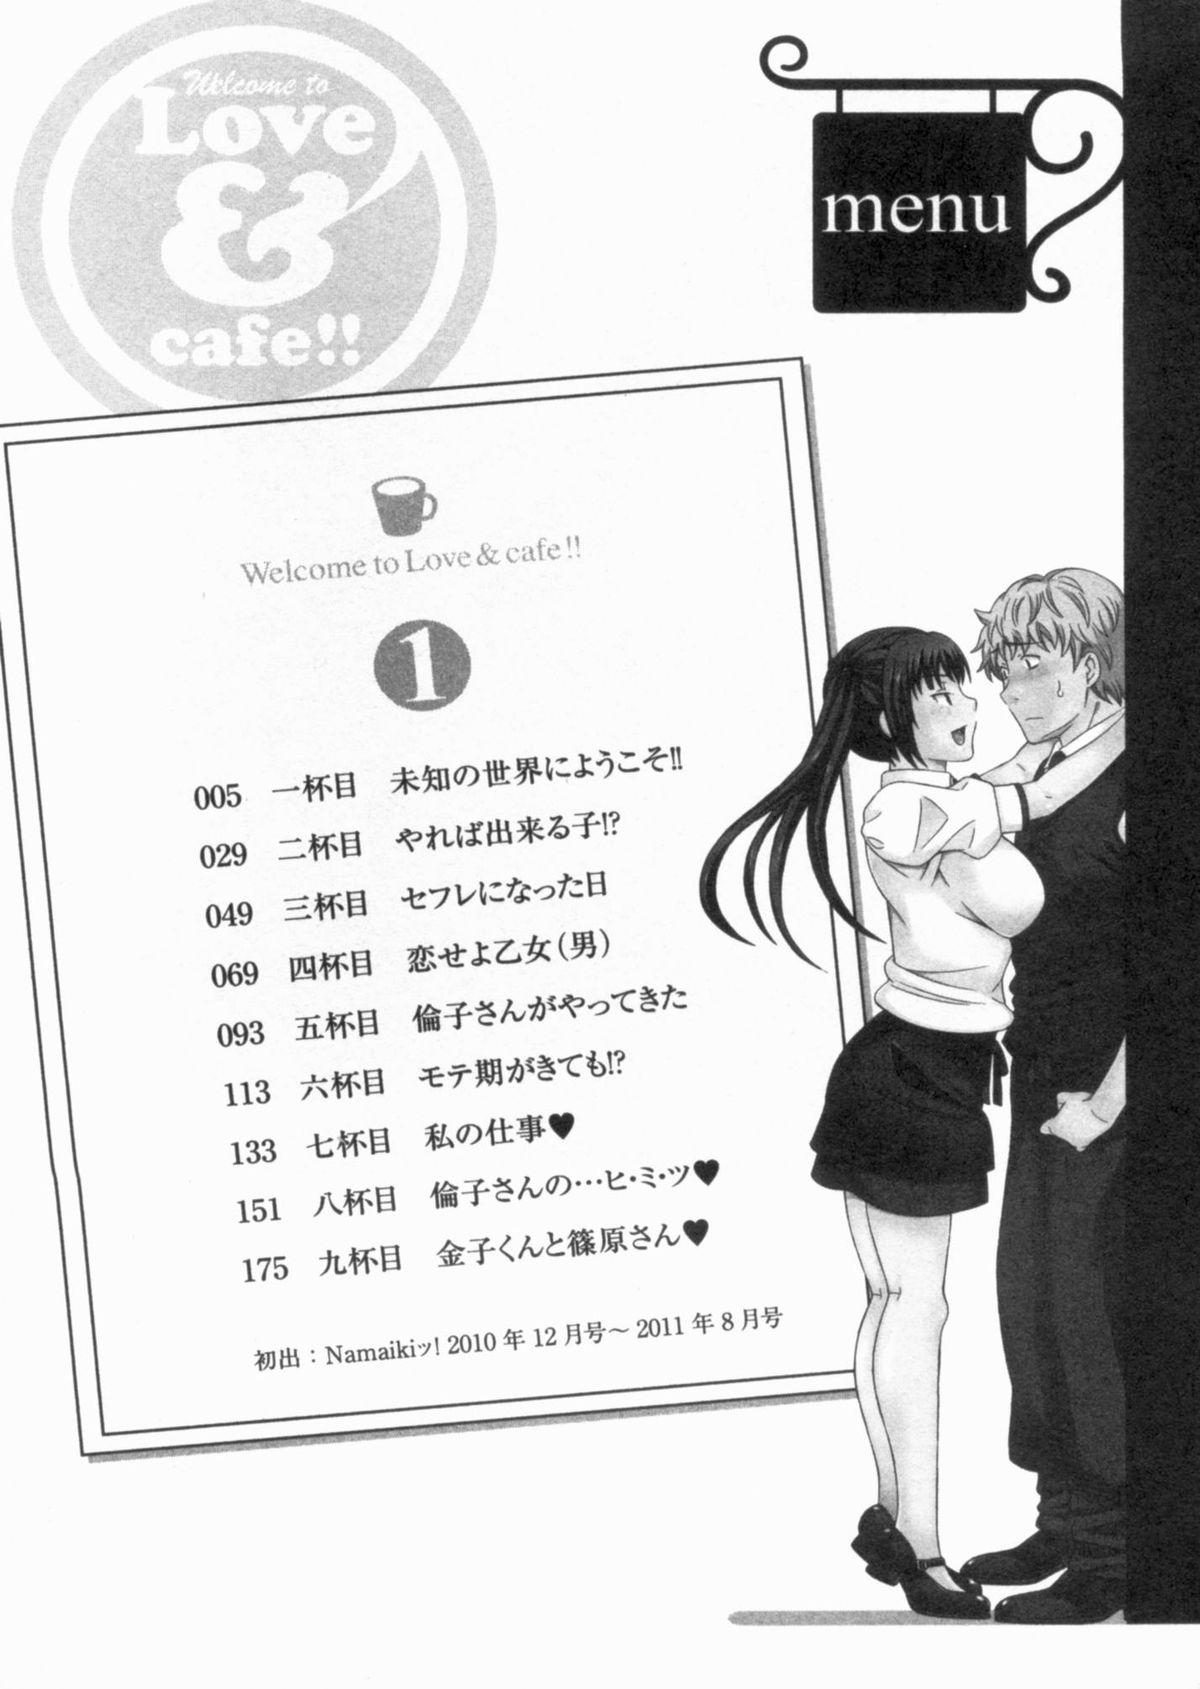 Cuck Koi Cafe ni Youkoso!! 1 - Welcome to Love&cafe!! 1 Hot Wife - Page 6